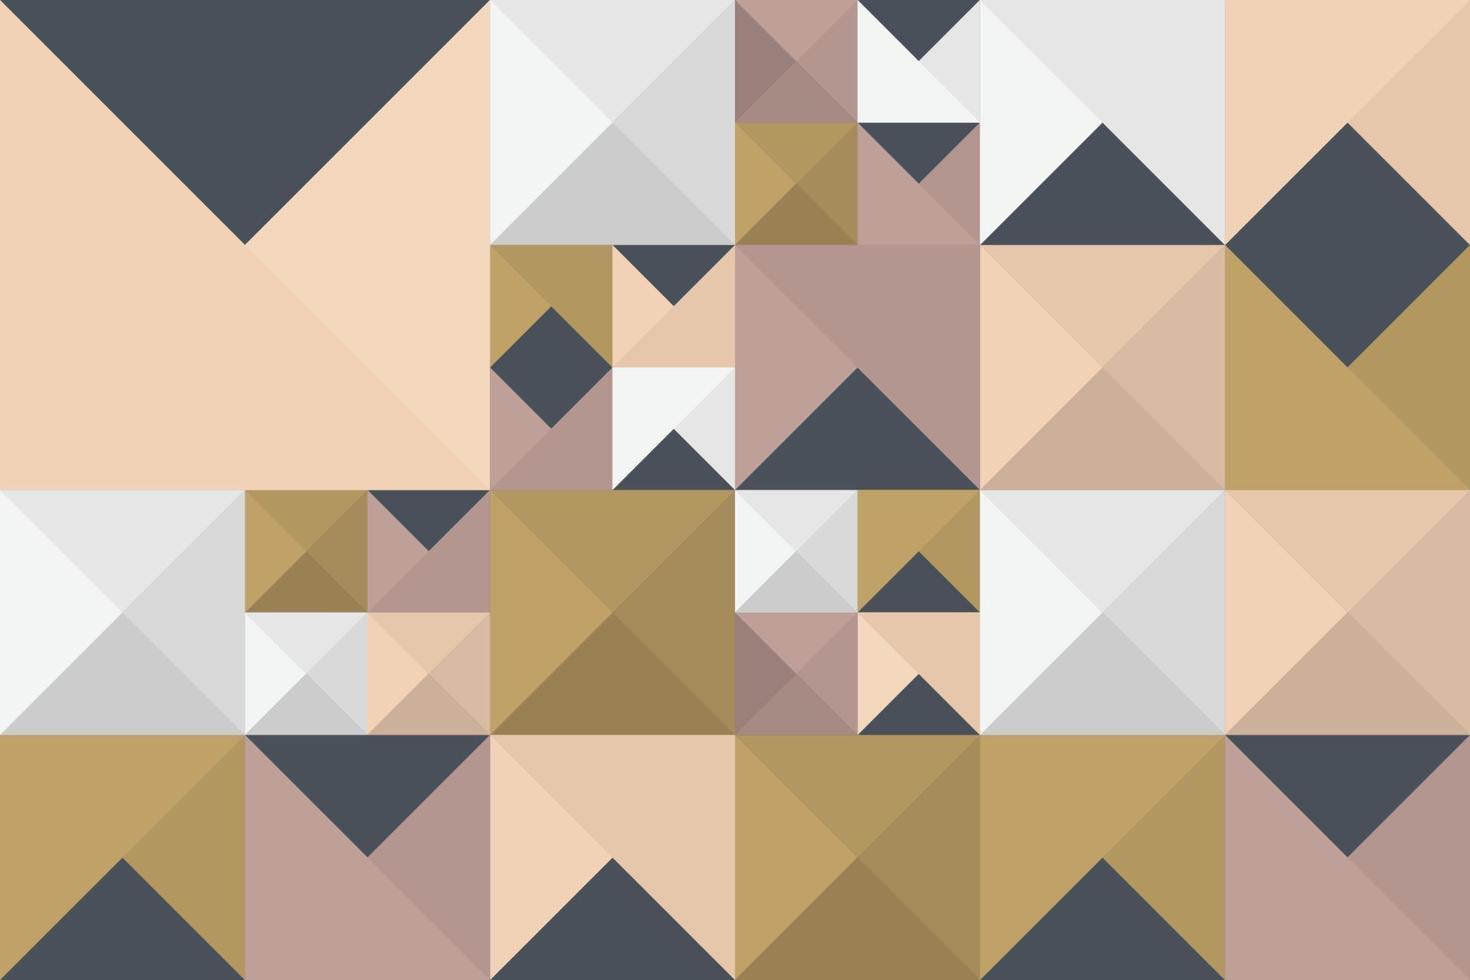 Random geometric shape composition tile background. Abstract colorful triangle mosaic seamless pattern vector